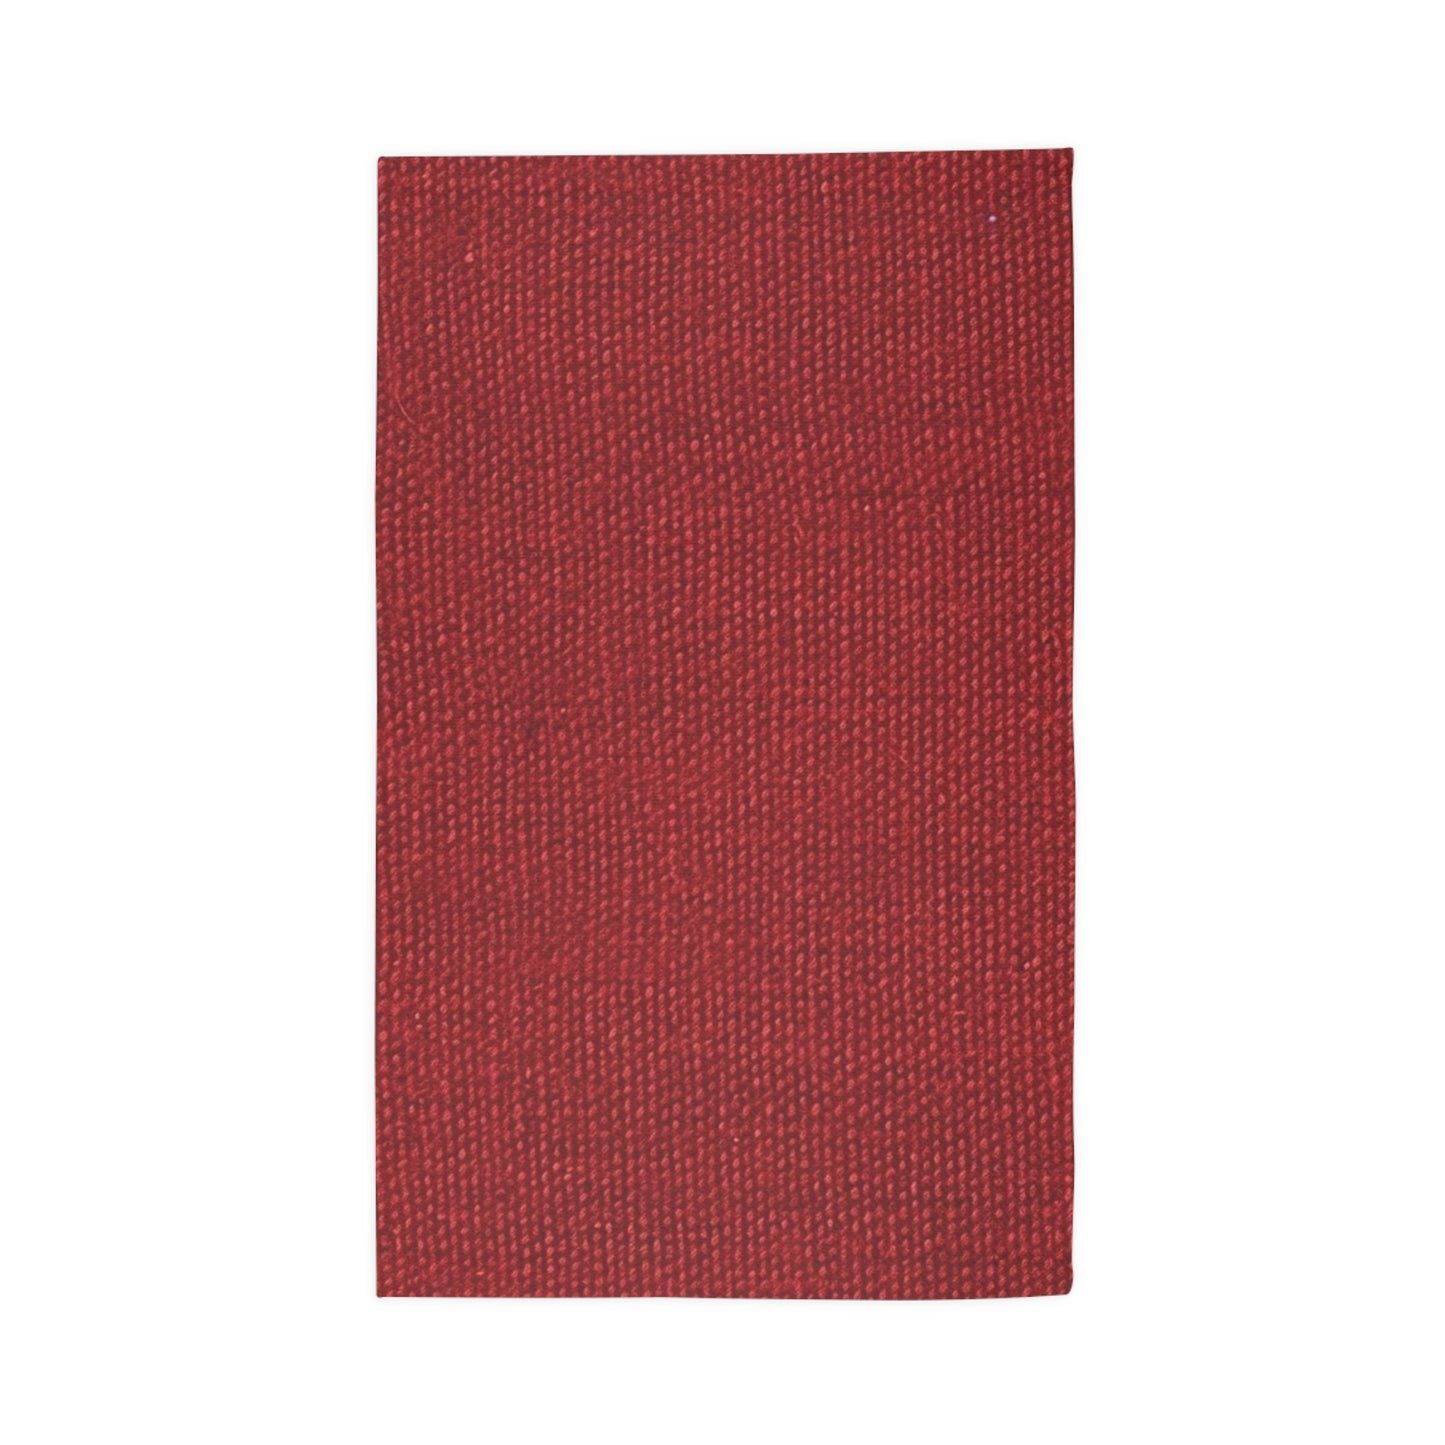 Bold Ruby Red: Denim-Inspired, Passionate Fabric Style - Dobby Rug